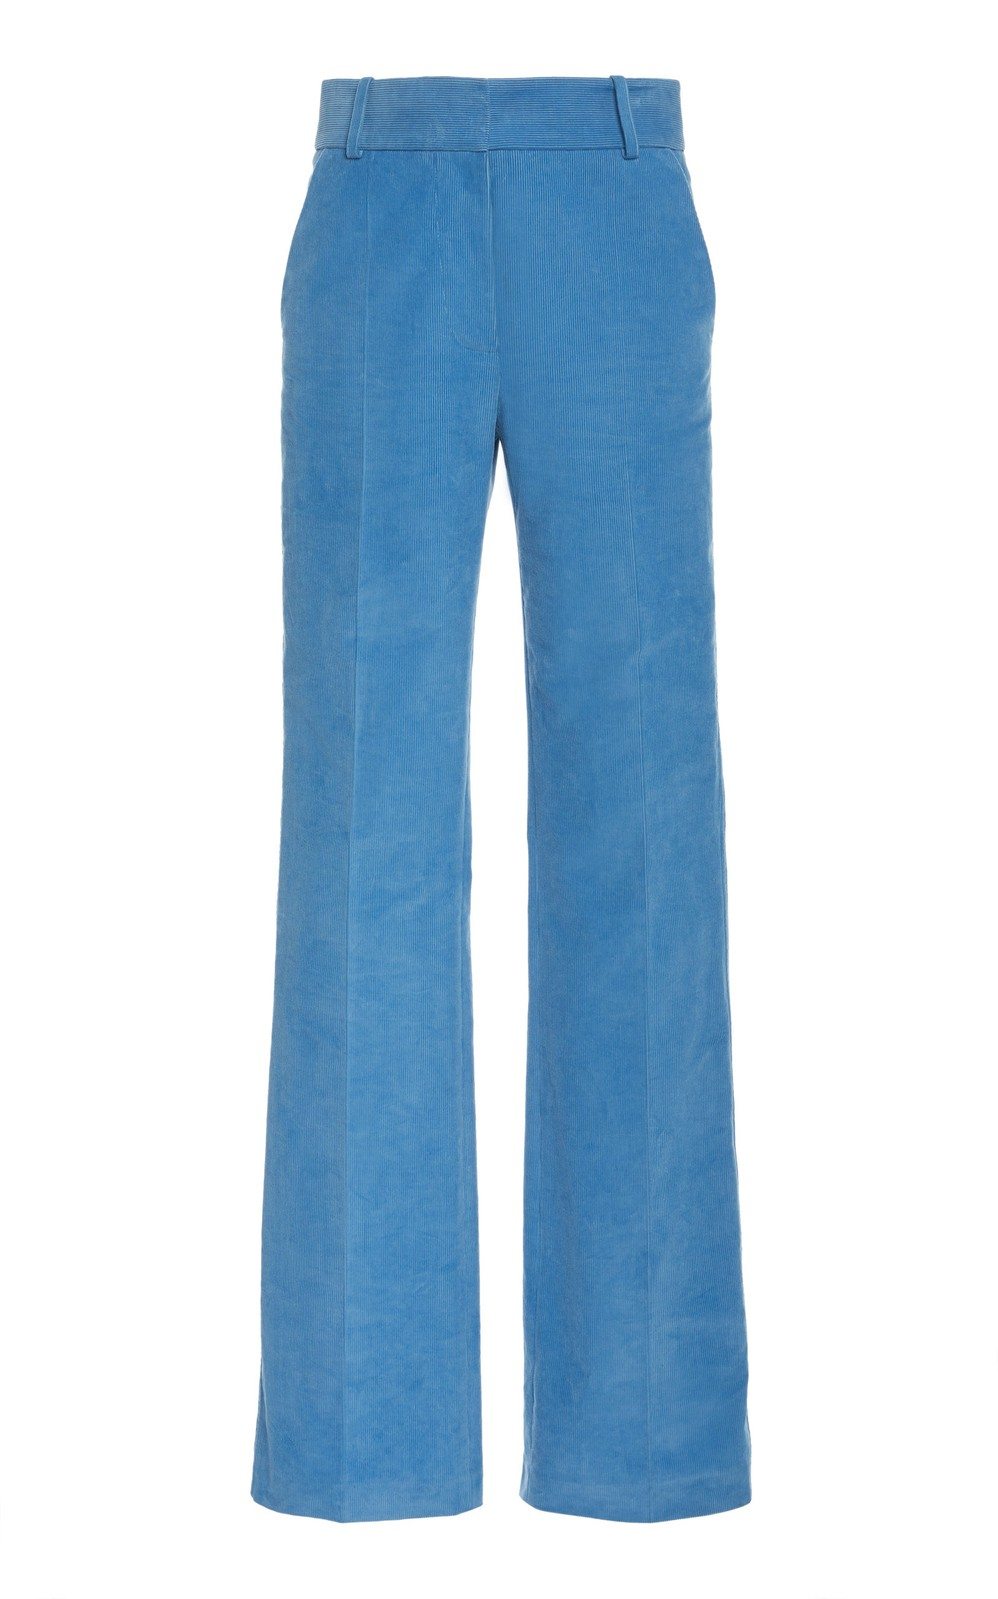 FLARED CORDUROY TROUSERS